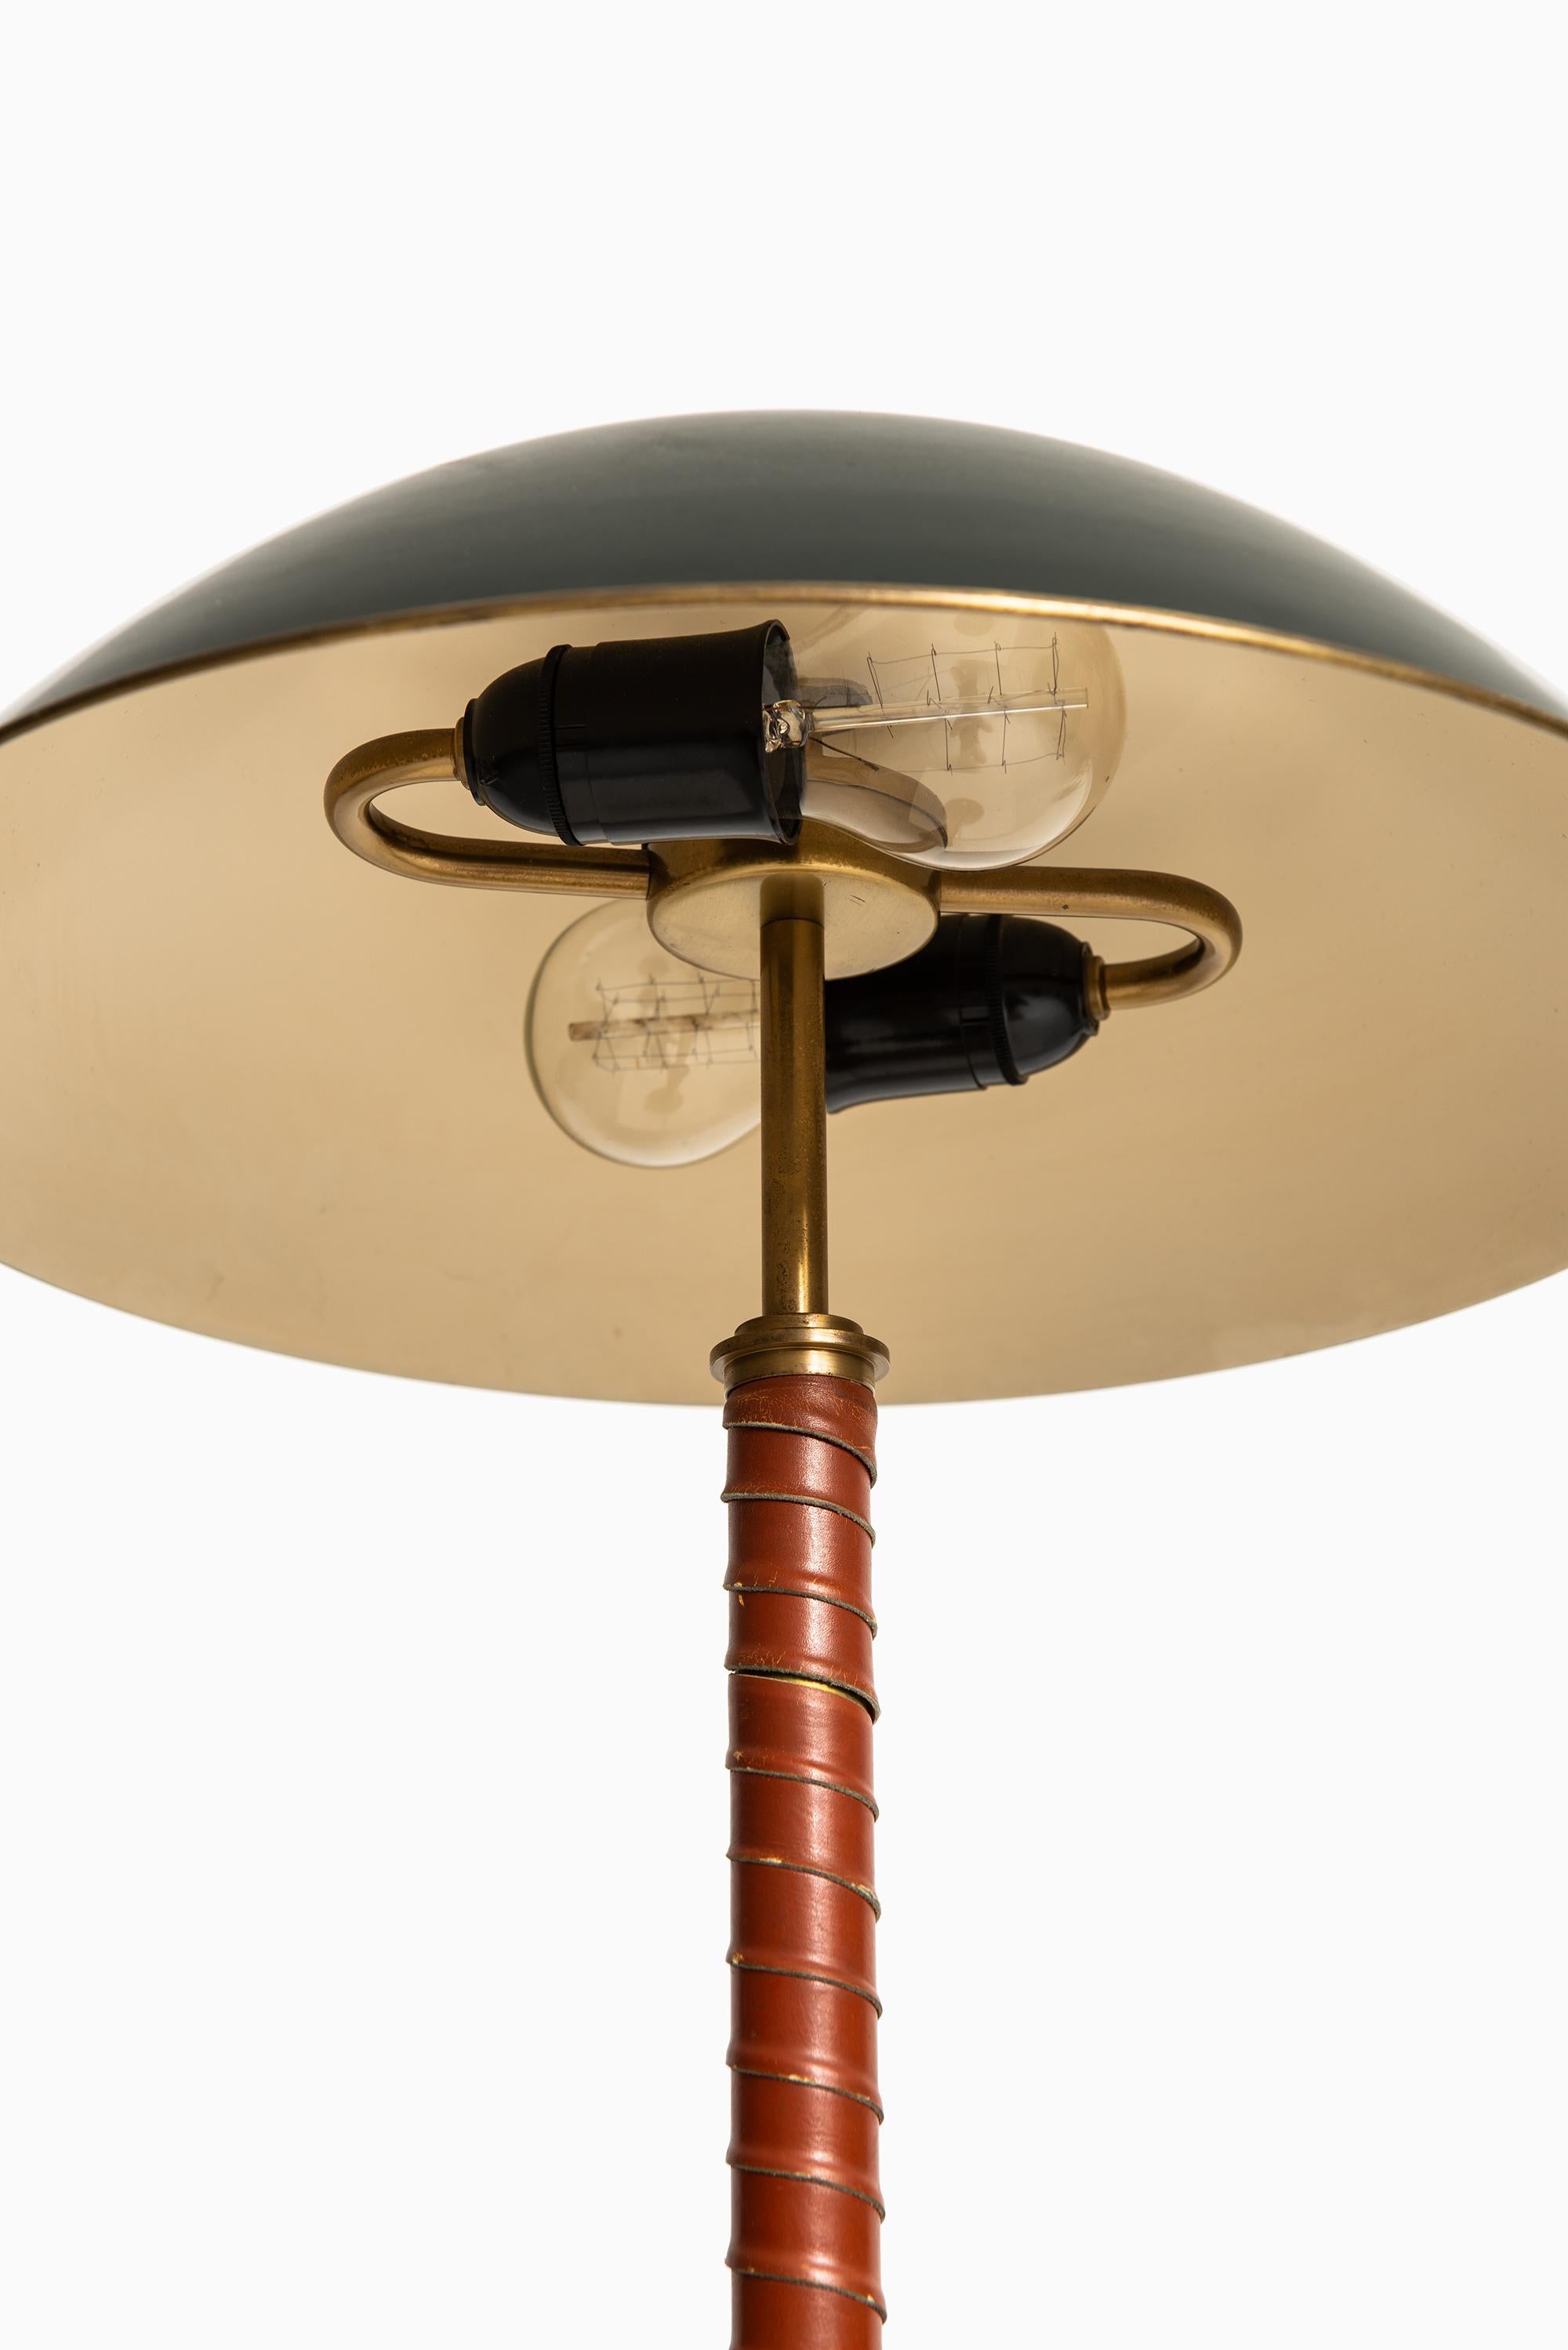 Swedish Harald Notini Attributed to Table Lamp Produced by Böhlmarks in Sweden